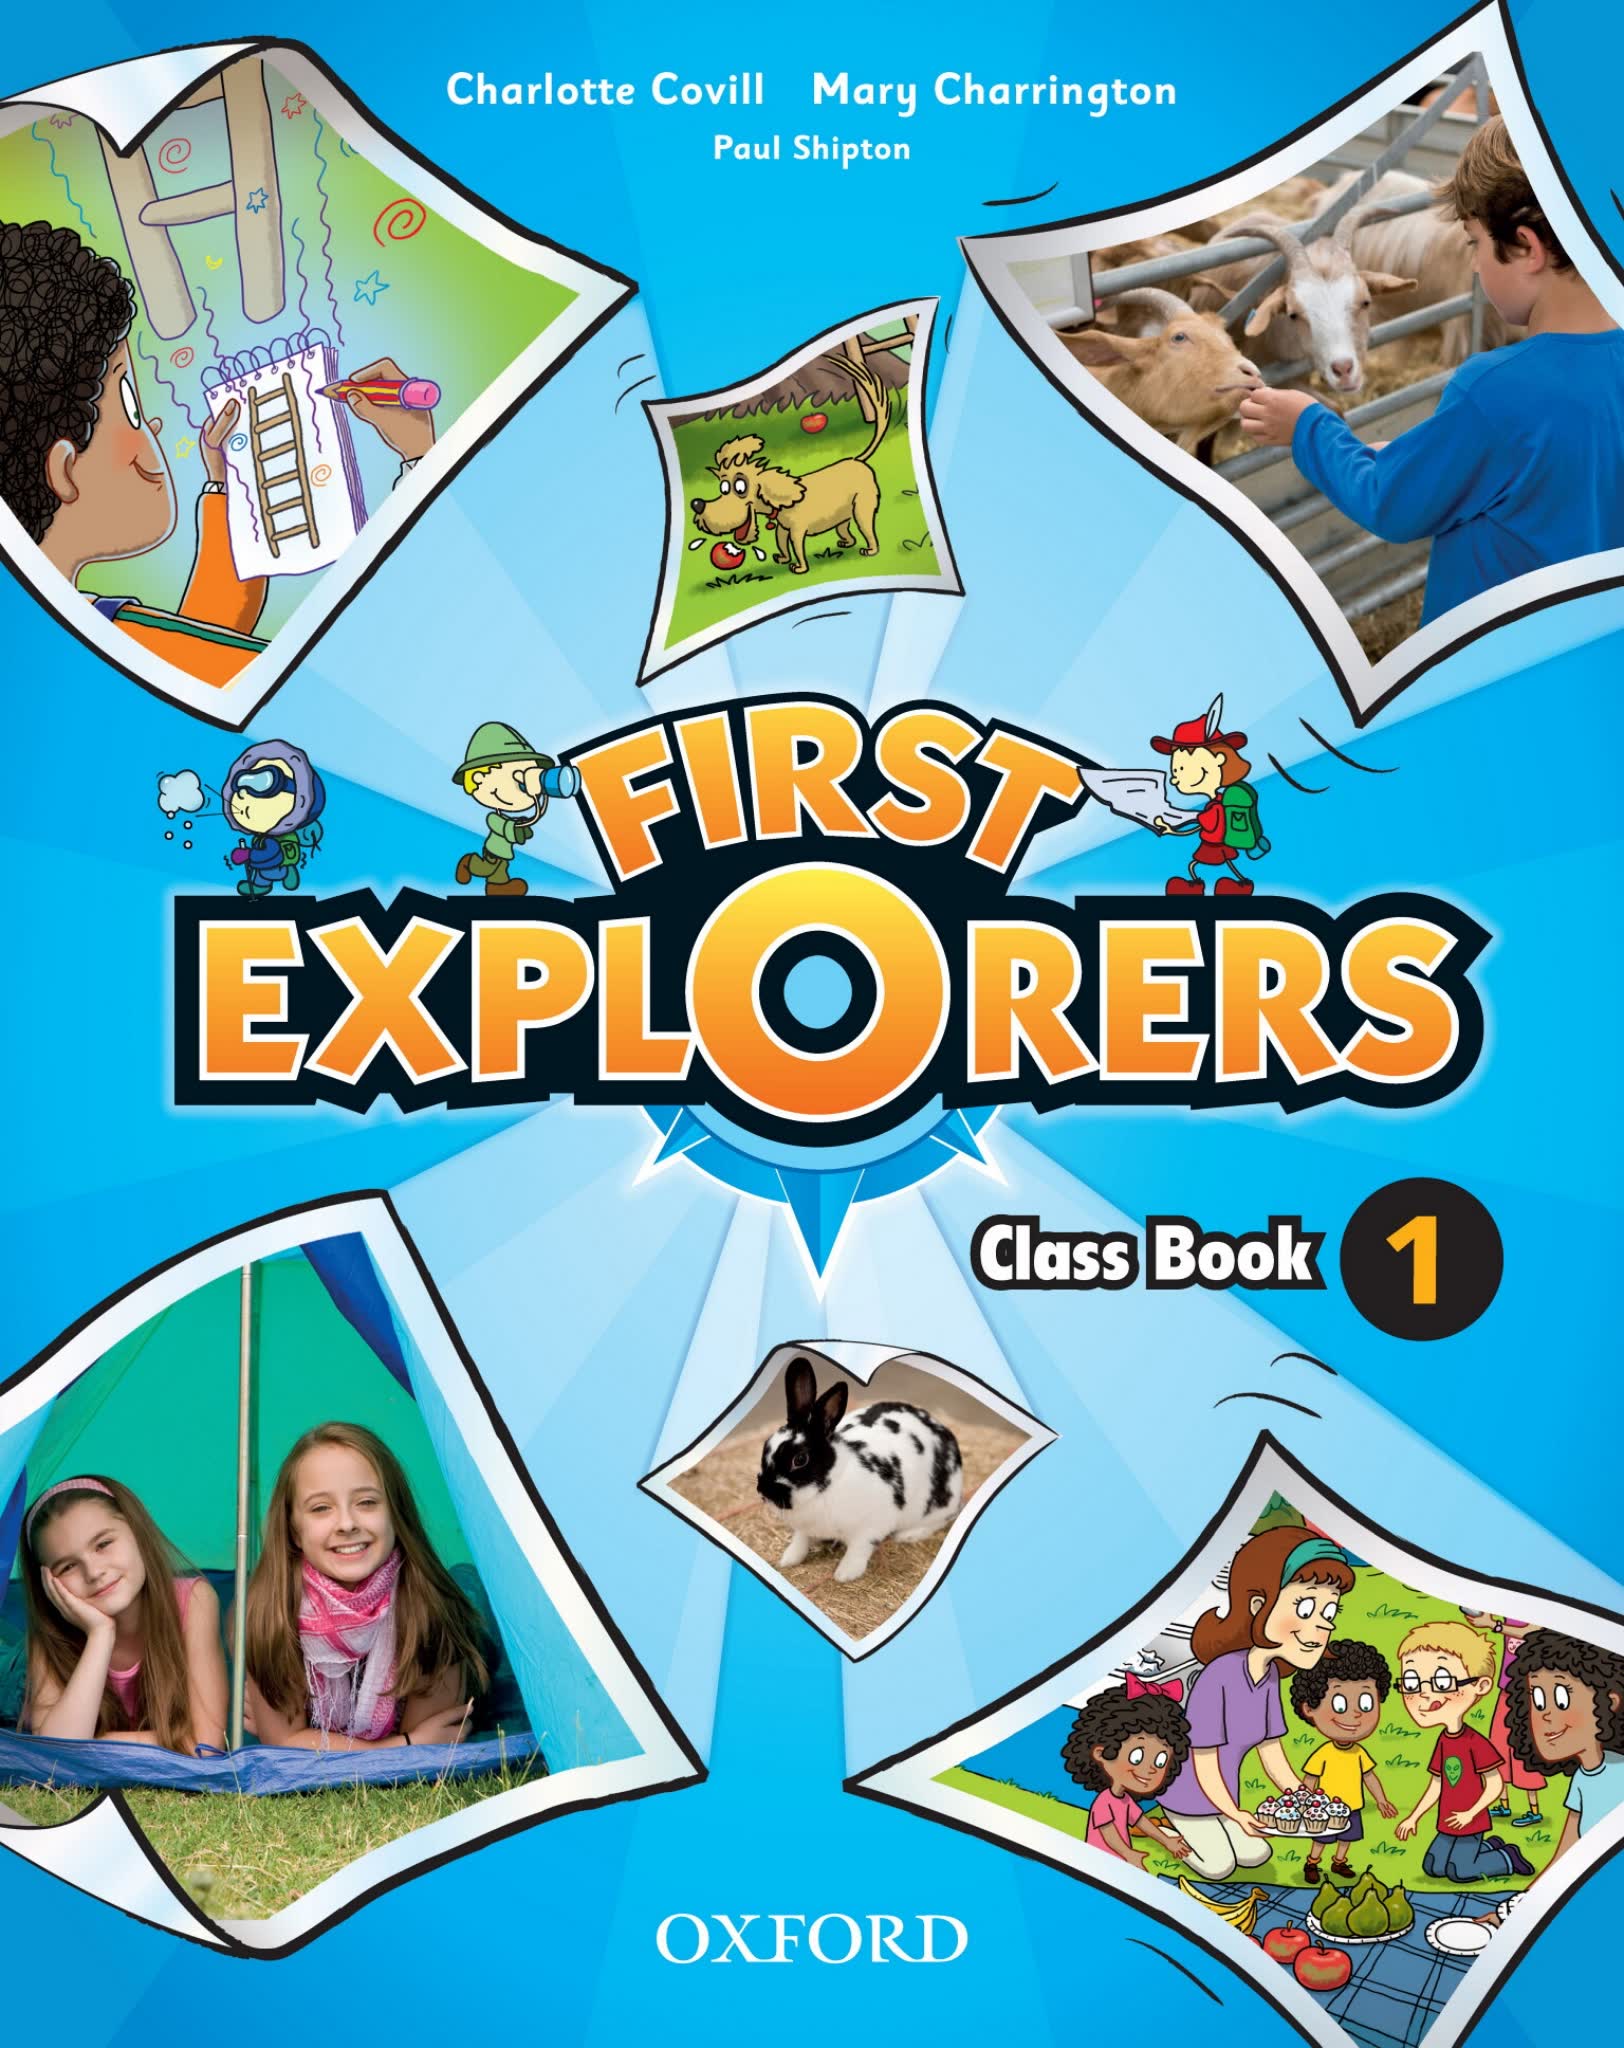 First-Explorers